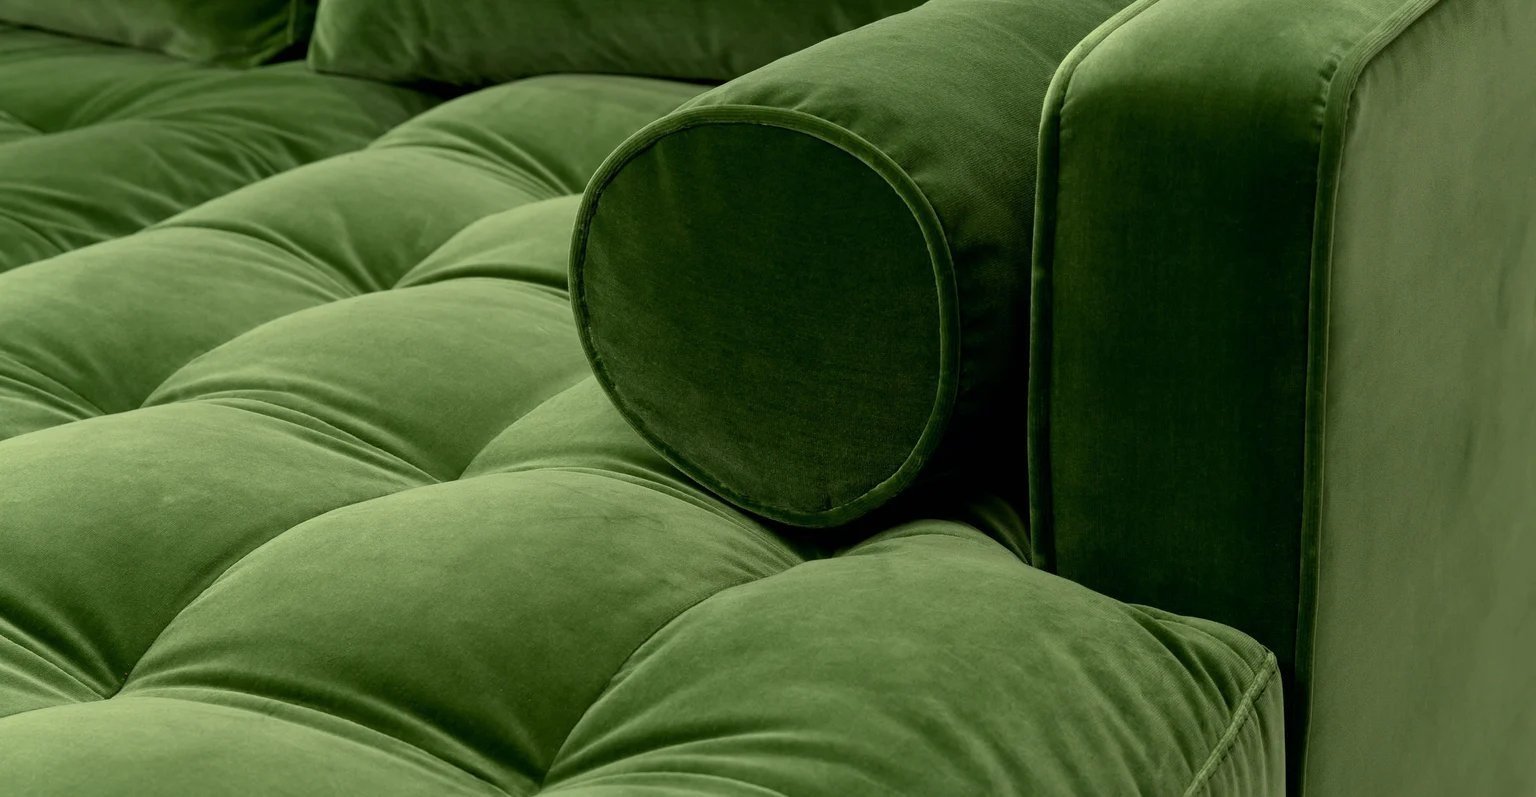 Sven Right Sectional Sofa, Grass Green - Image 4